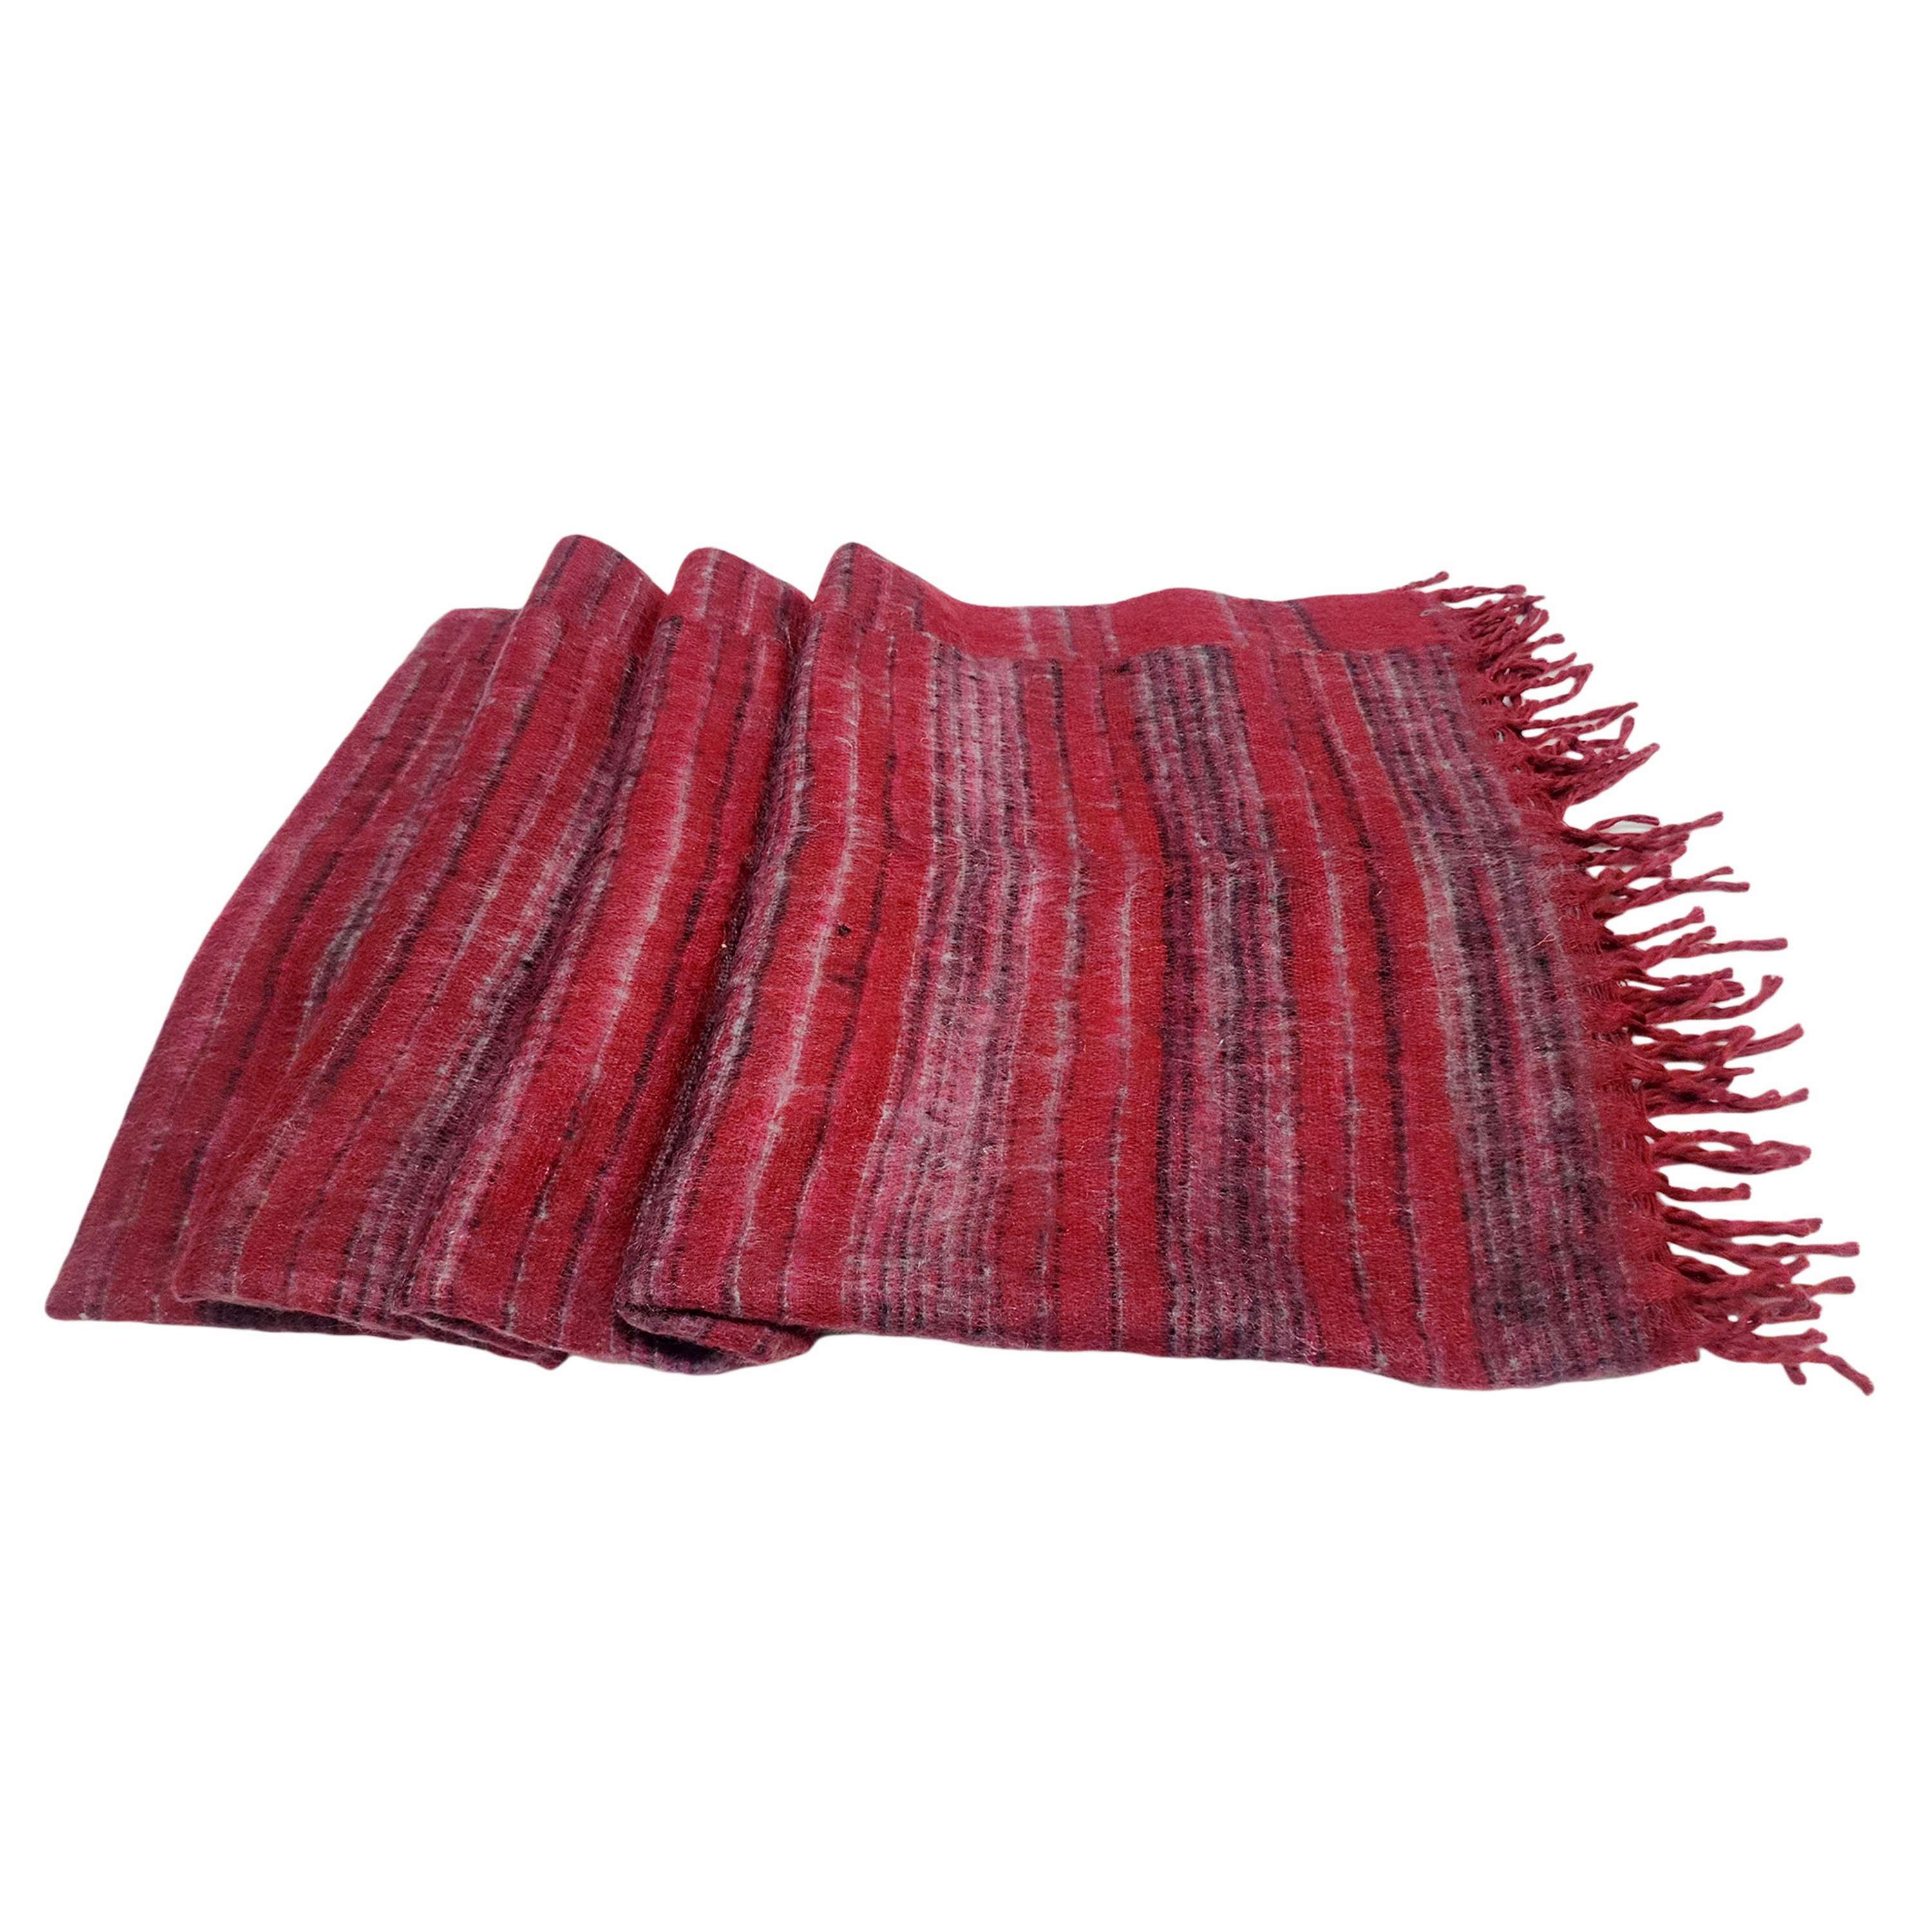 Tibet Shawl, Stay Cozy And Stylish With Acrylic Woolen Shawls, Maroon Color And Stripes